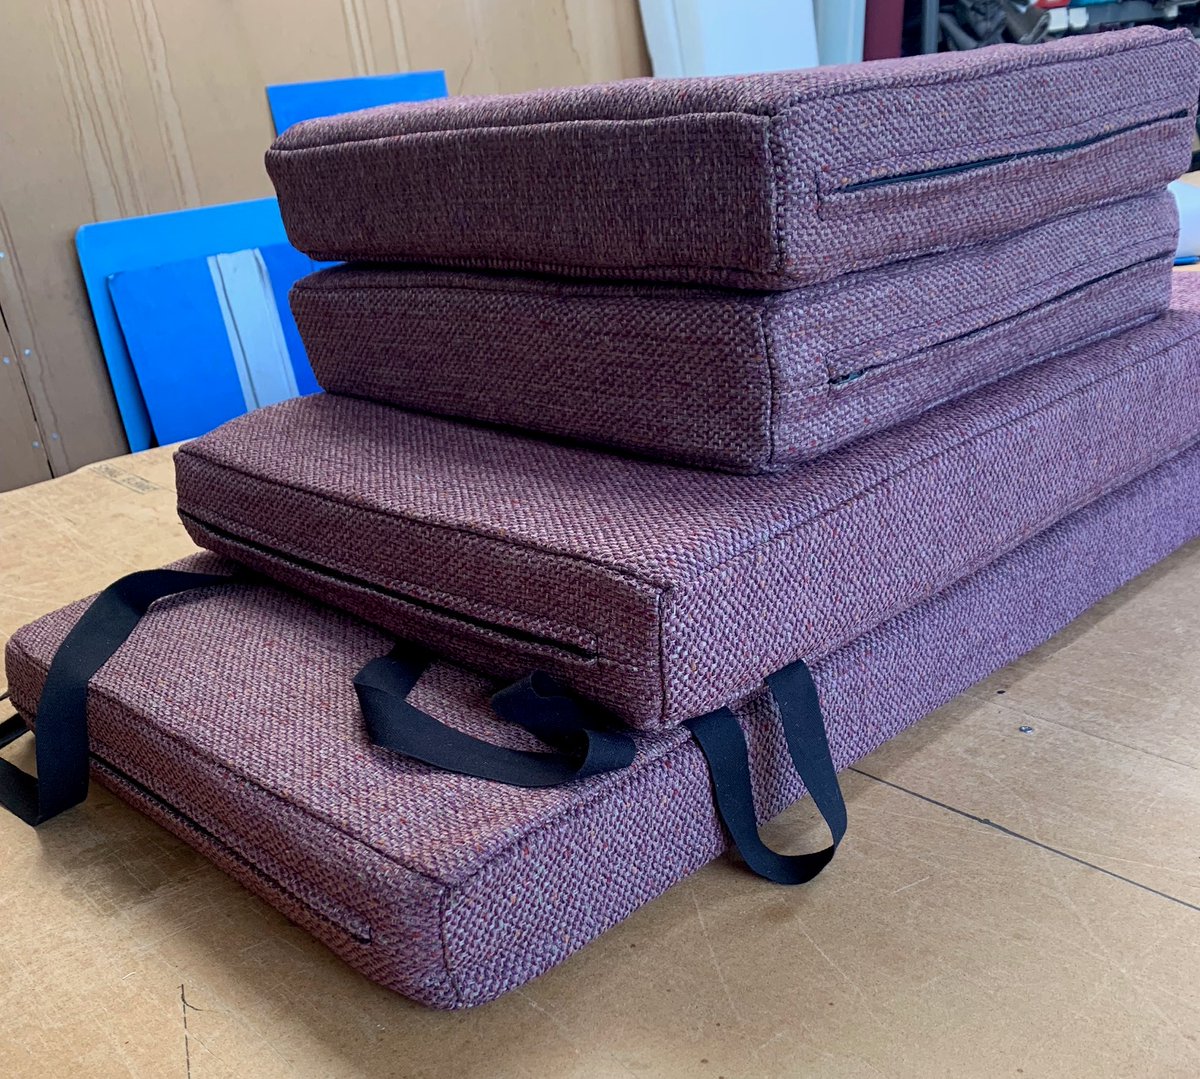 A custom Bench Cushion order ready to go out, one includes ties as it needs to be secured. I'm sure she's going to be very happy with these tomorrow 🤩 

#MHHSBD #summer #gardenliving #benchcushions